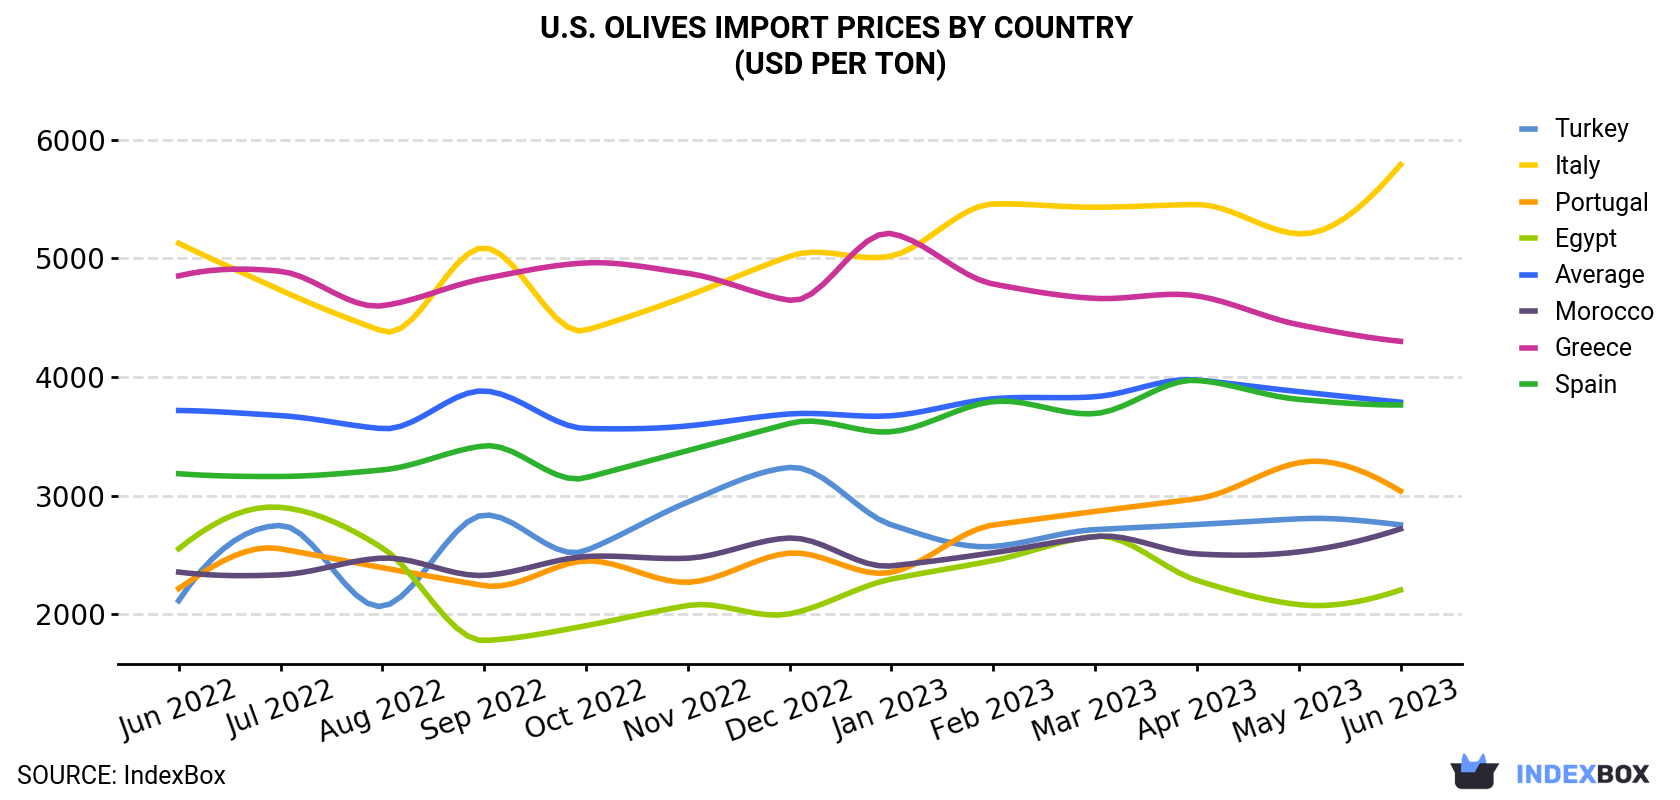 U.S. Olives Import Prices By Country (USD Per Ton)